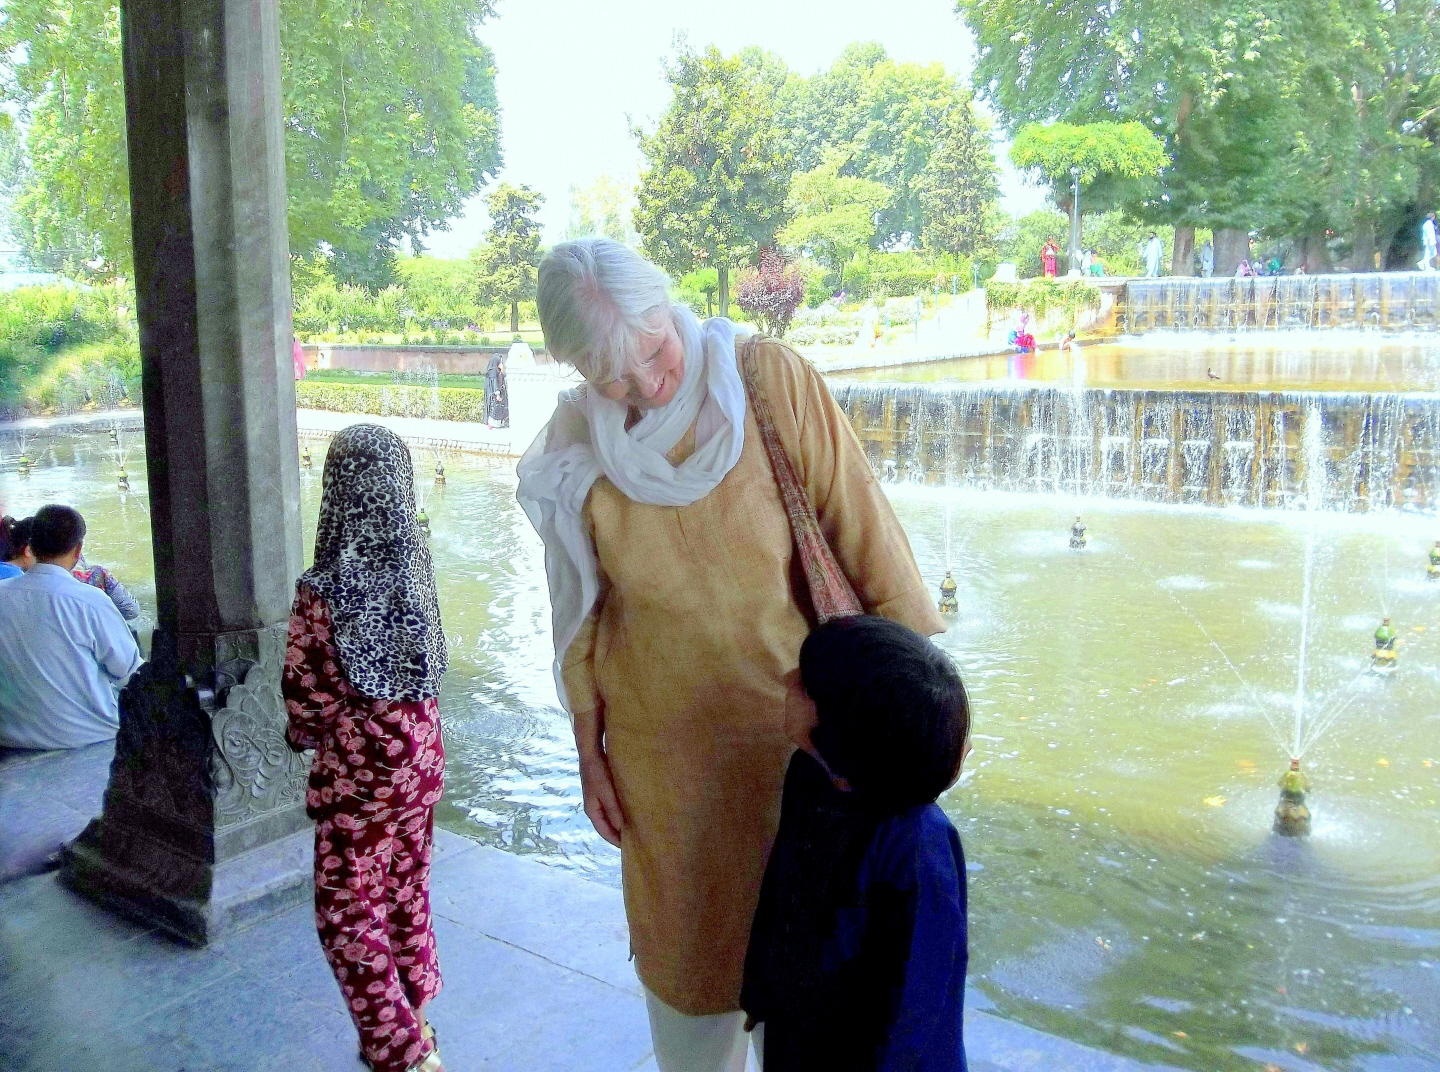 Children are the Most Curious - The Most Wonderful Asset for Learning & an Open Mind - Shalimar Gardens, Srinagar- Kashmir